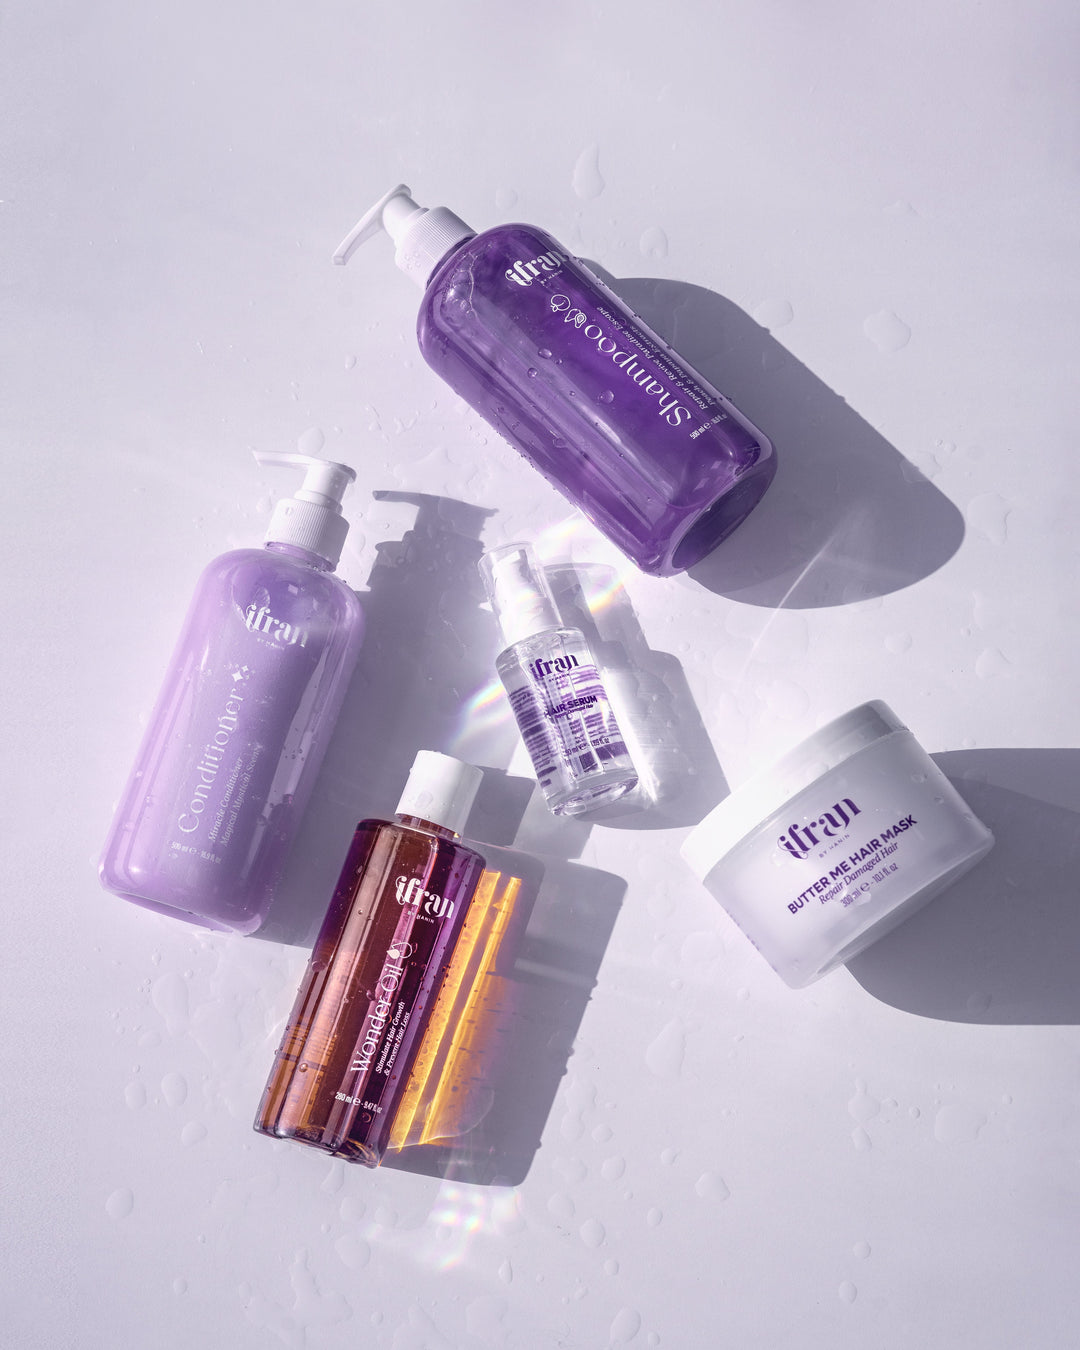 Discover our range of products designed to combat hair loss and promote healthier, fuller hair.